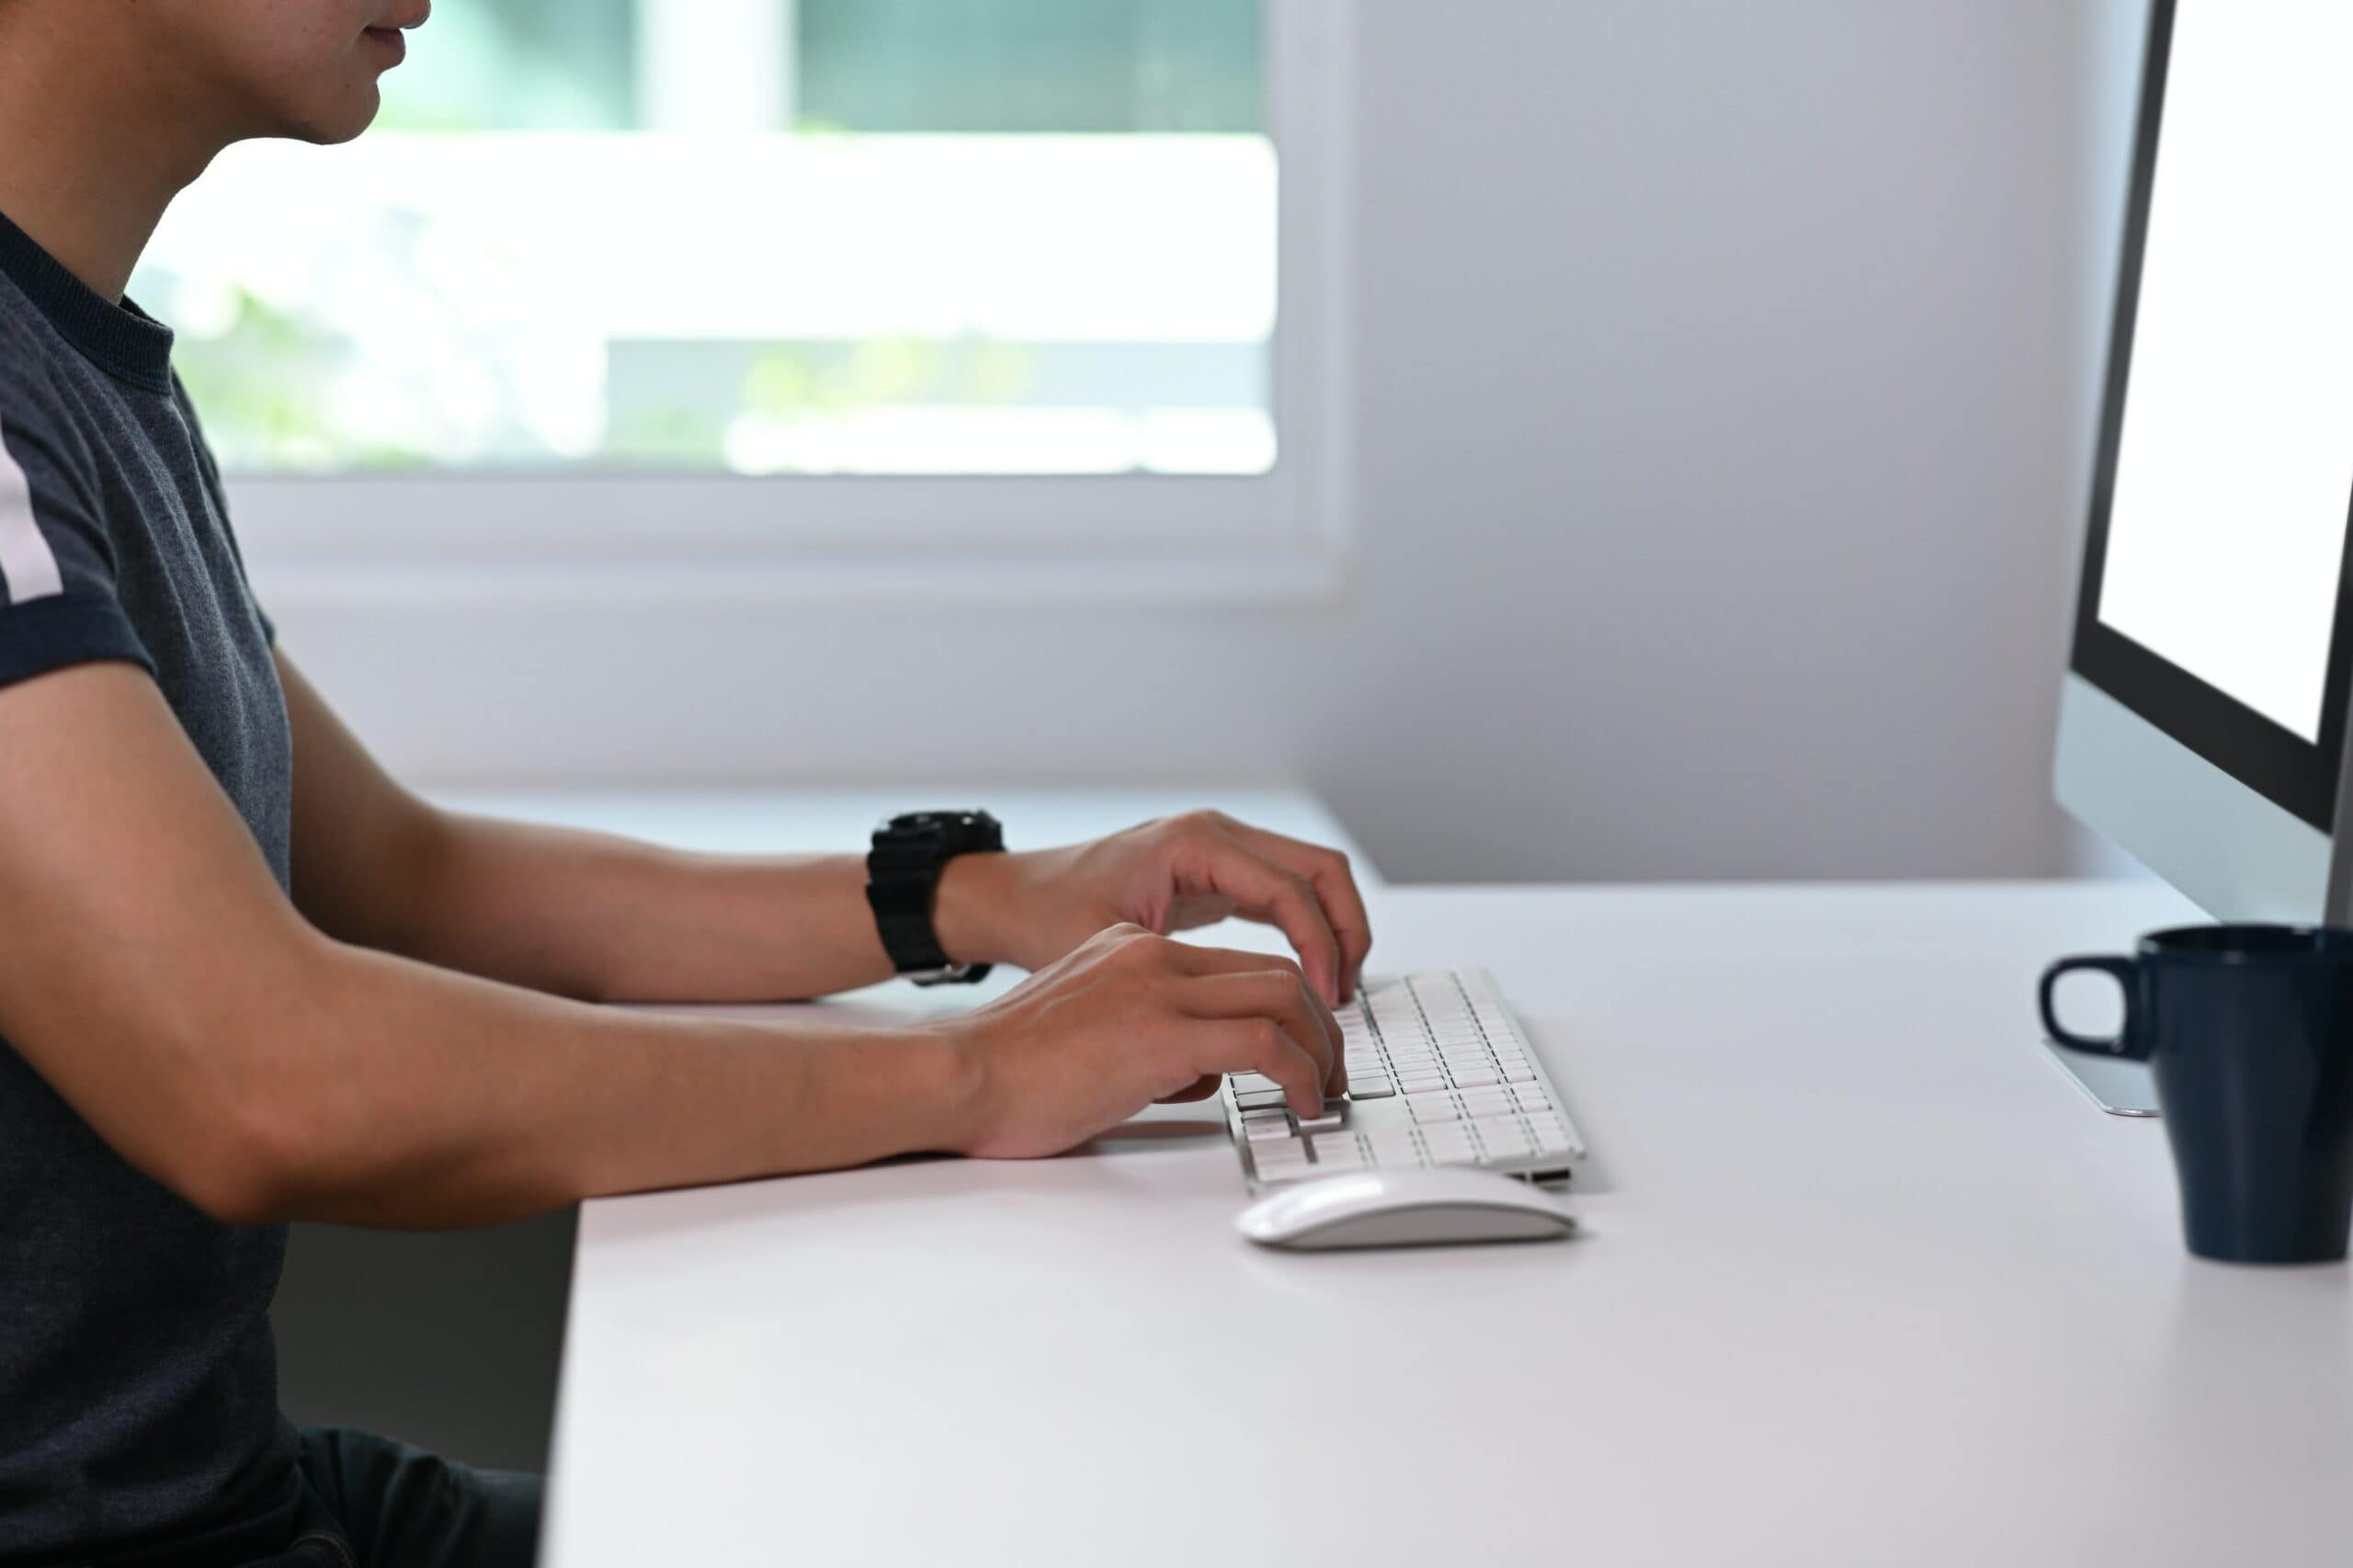 A man is sitting at a desk and typing on a computer, teleworking from home once he established how should you secure your home wireless network for teleworking.